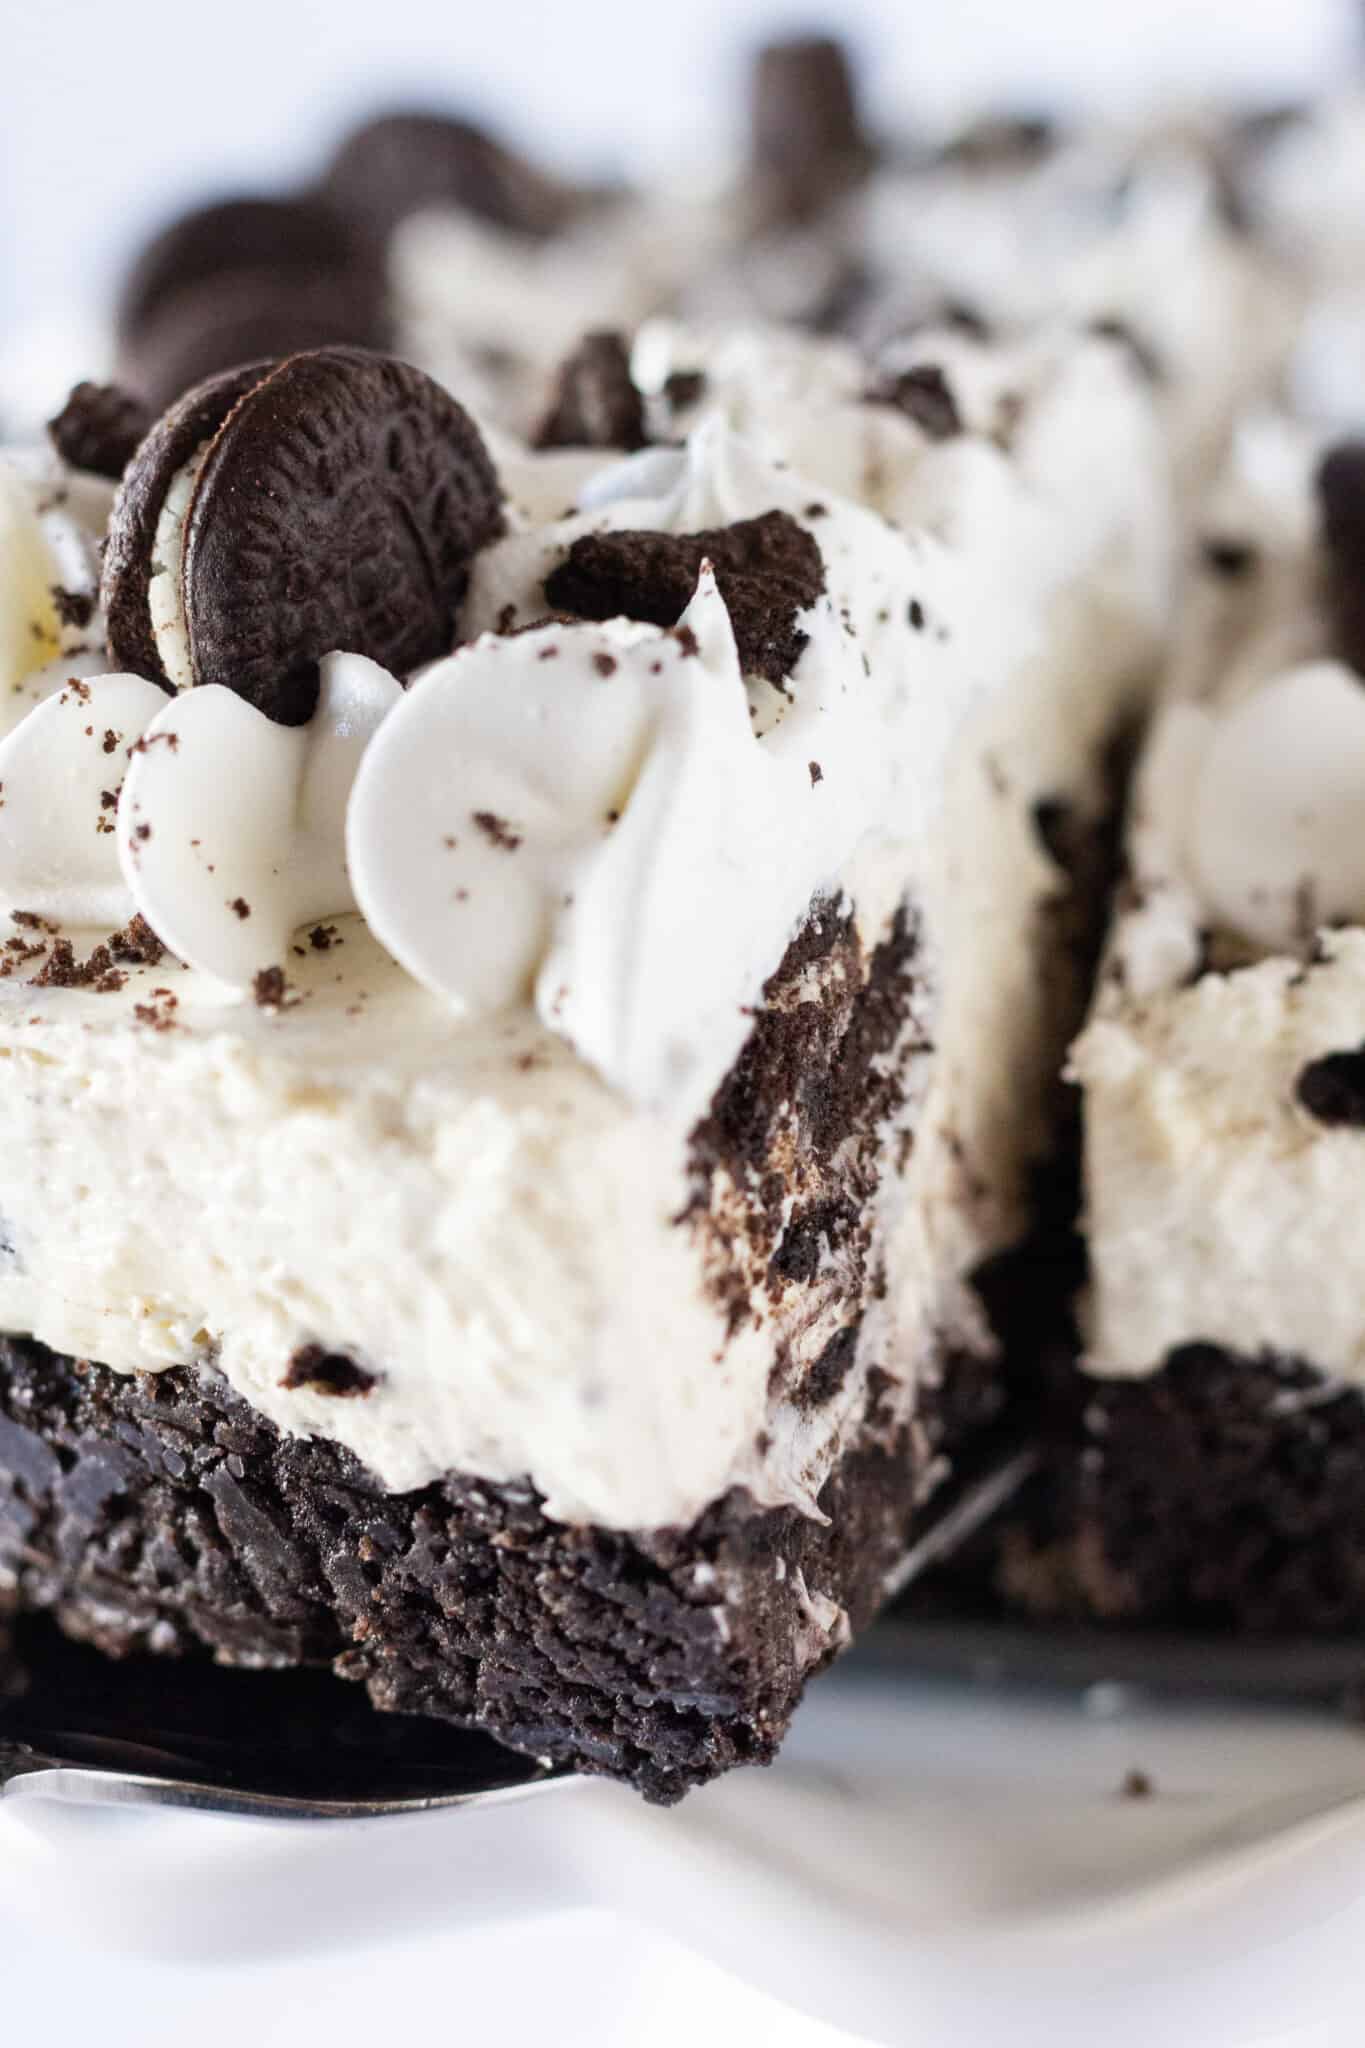 Oreo No Bake Cheesecake Recipe featured by top US dessert blogger, Practically Homemade